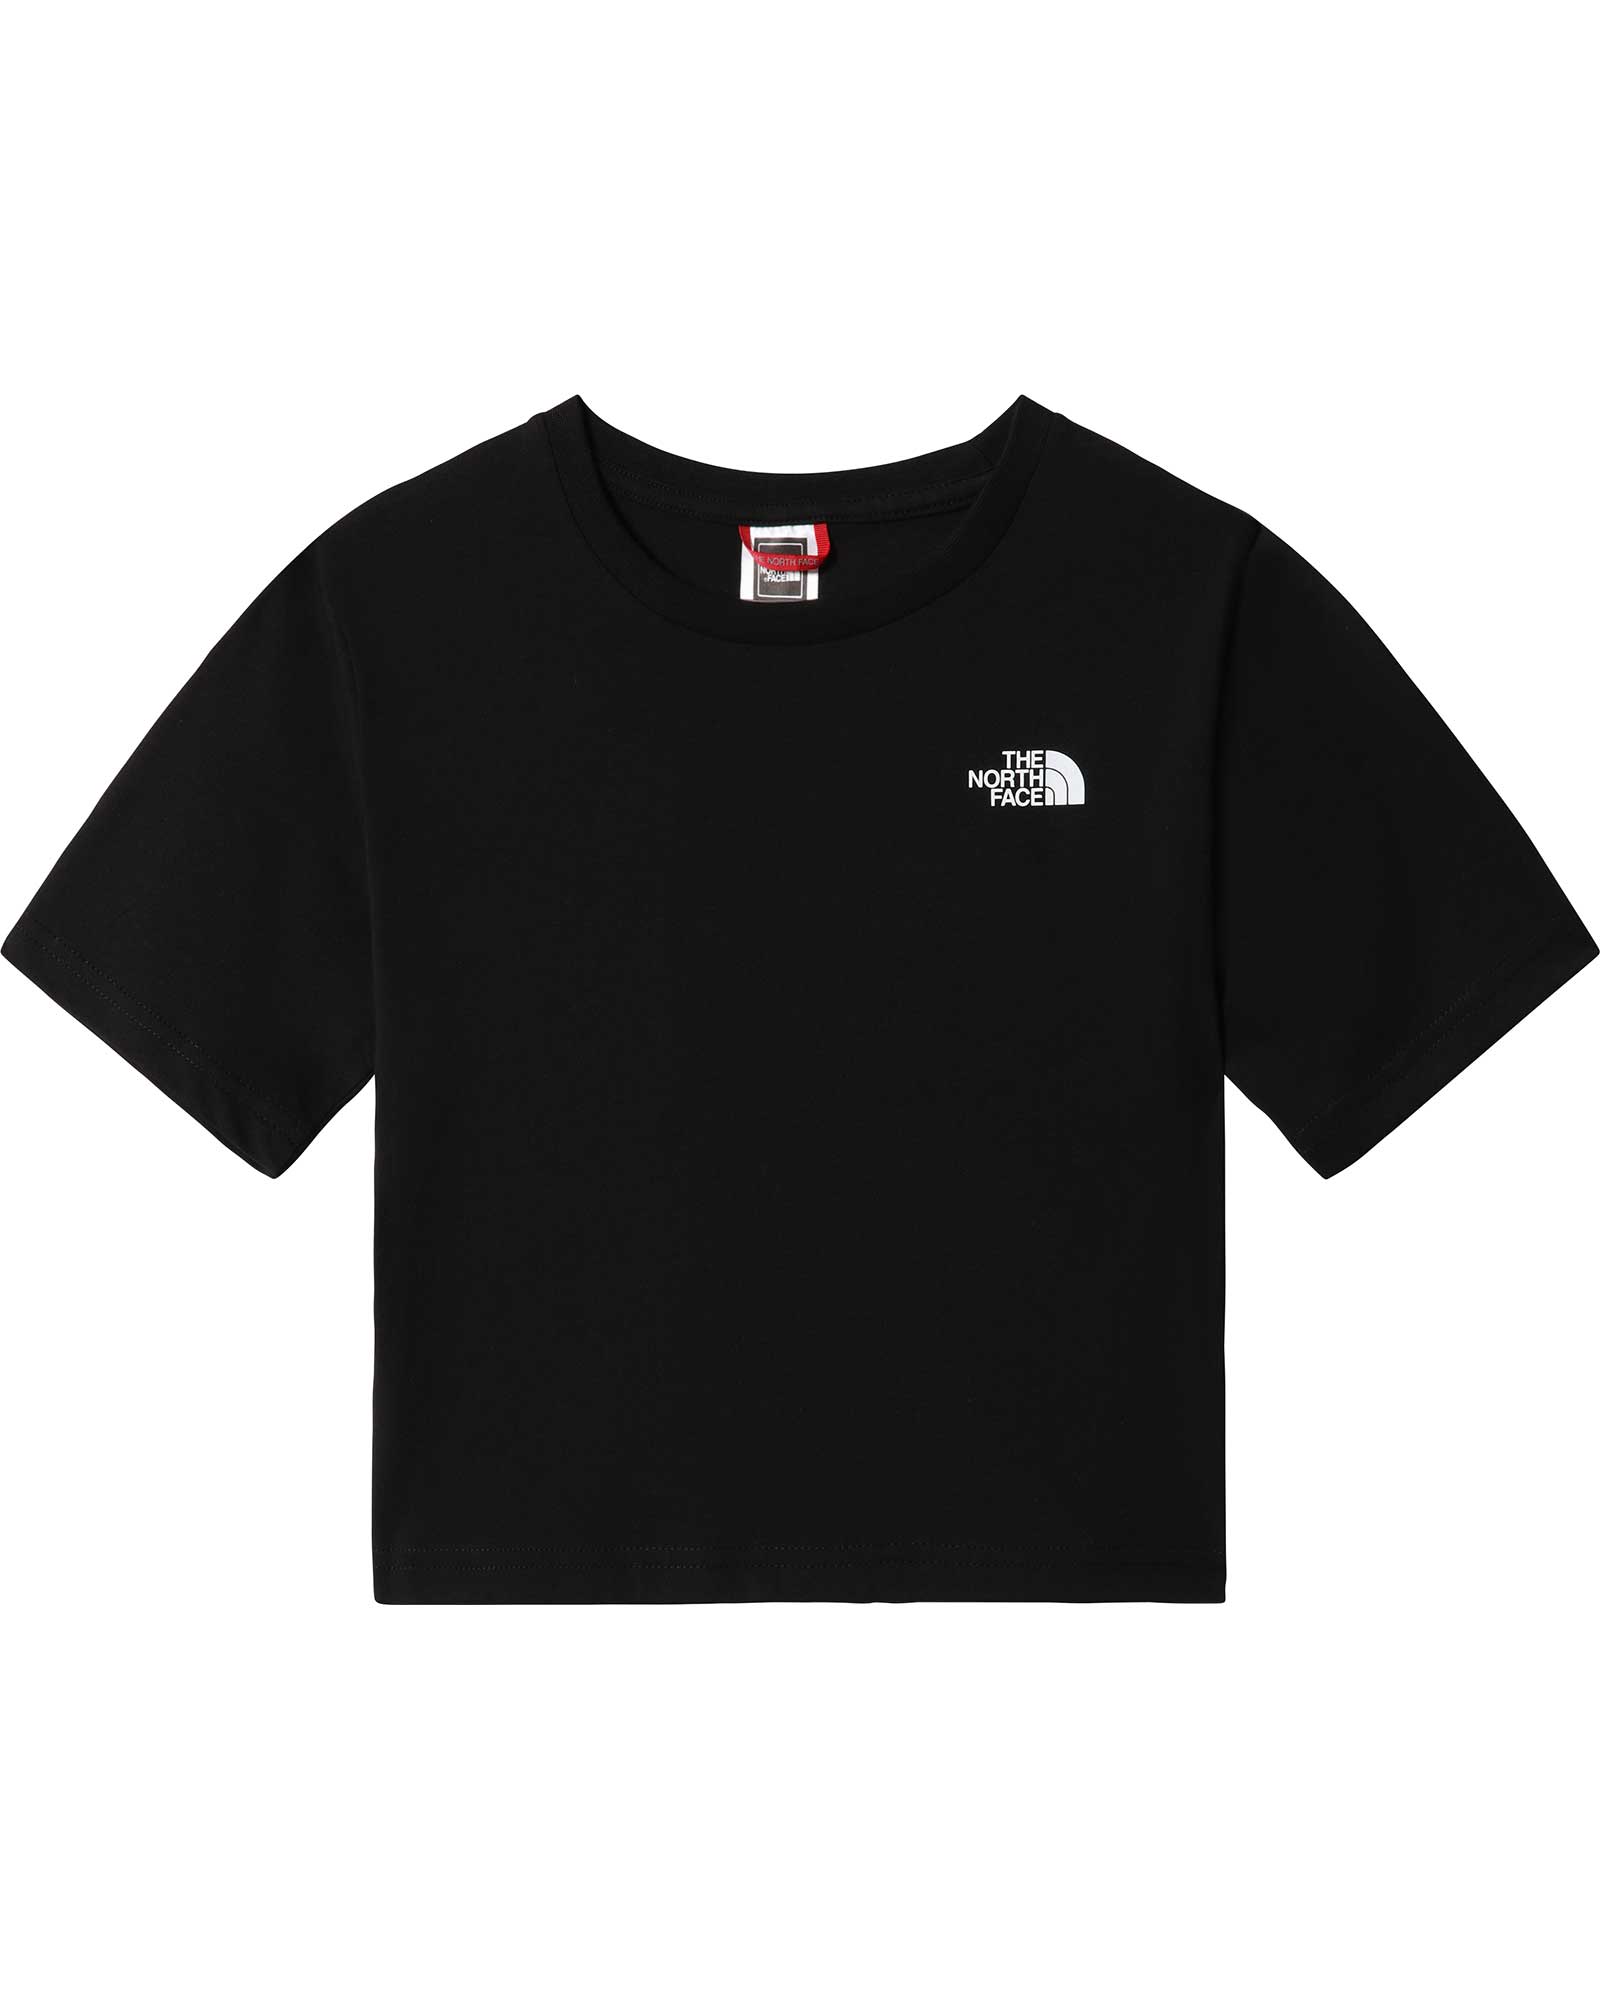 The North Face Simple Dome Girls Cropped T-shirt